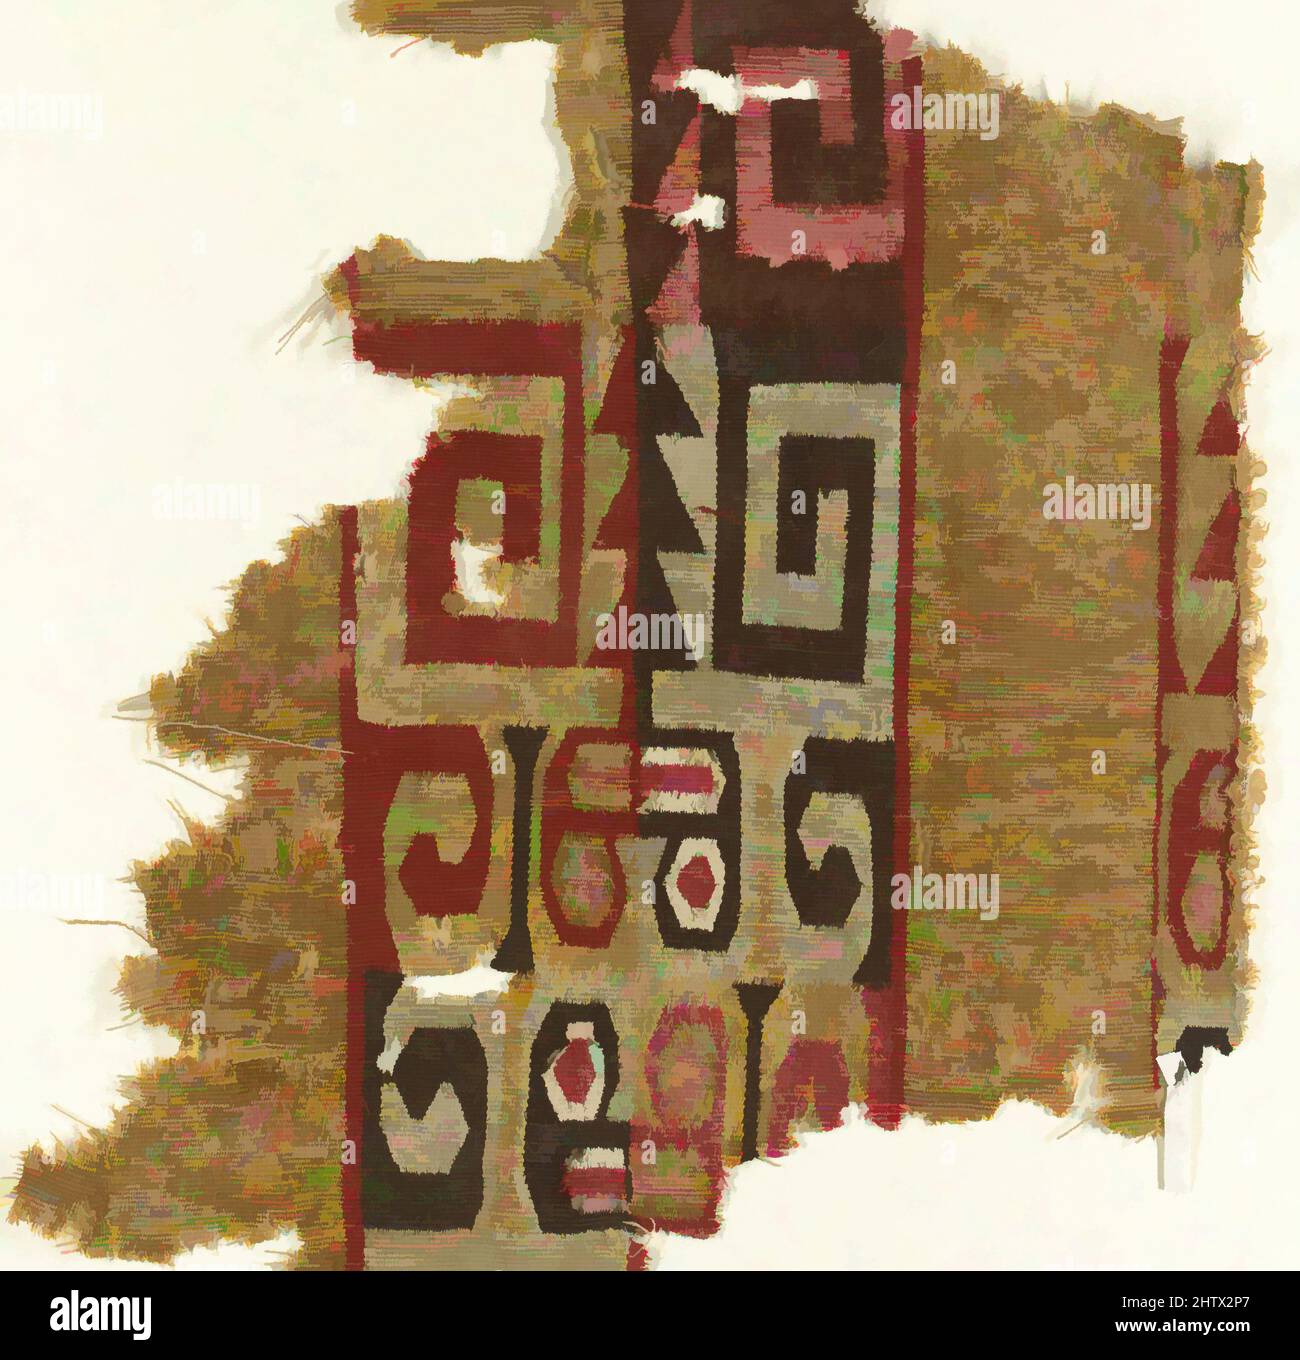 Art inspired by Tunic Fragment, 7th–9th century, Peru, Wari, Camelid hair, cotton, Overall: 9 5/8 x 11 1/4 in. (24.43 x 28.58 cm), Textiles-Woven, Classic works modernized by Artotop with a splash of modernity. Shapes, color and value, eye-catching visual impact on art. Emotions through freedom of artworks in a contemporary way. A timeless message pursuing a wildly creative new direction. Artists turning to the digital medium and creating the Artotop NFT Stock Photo